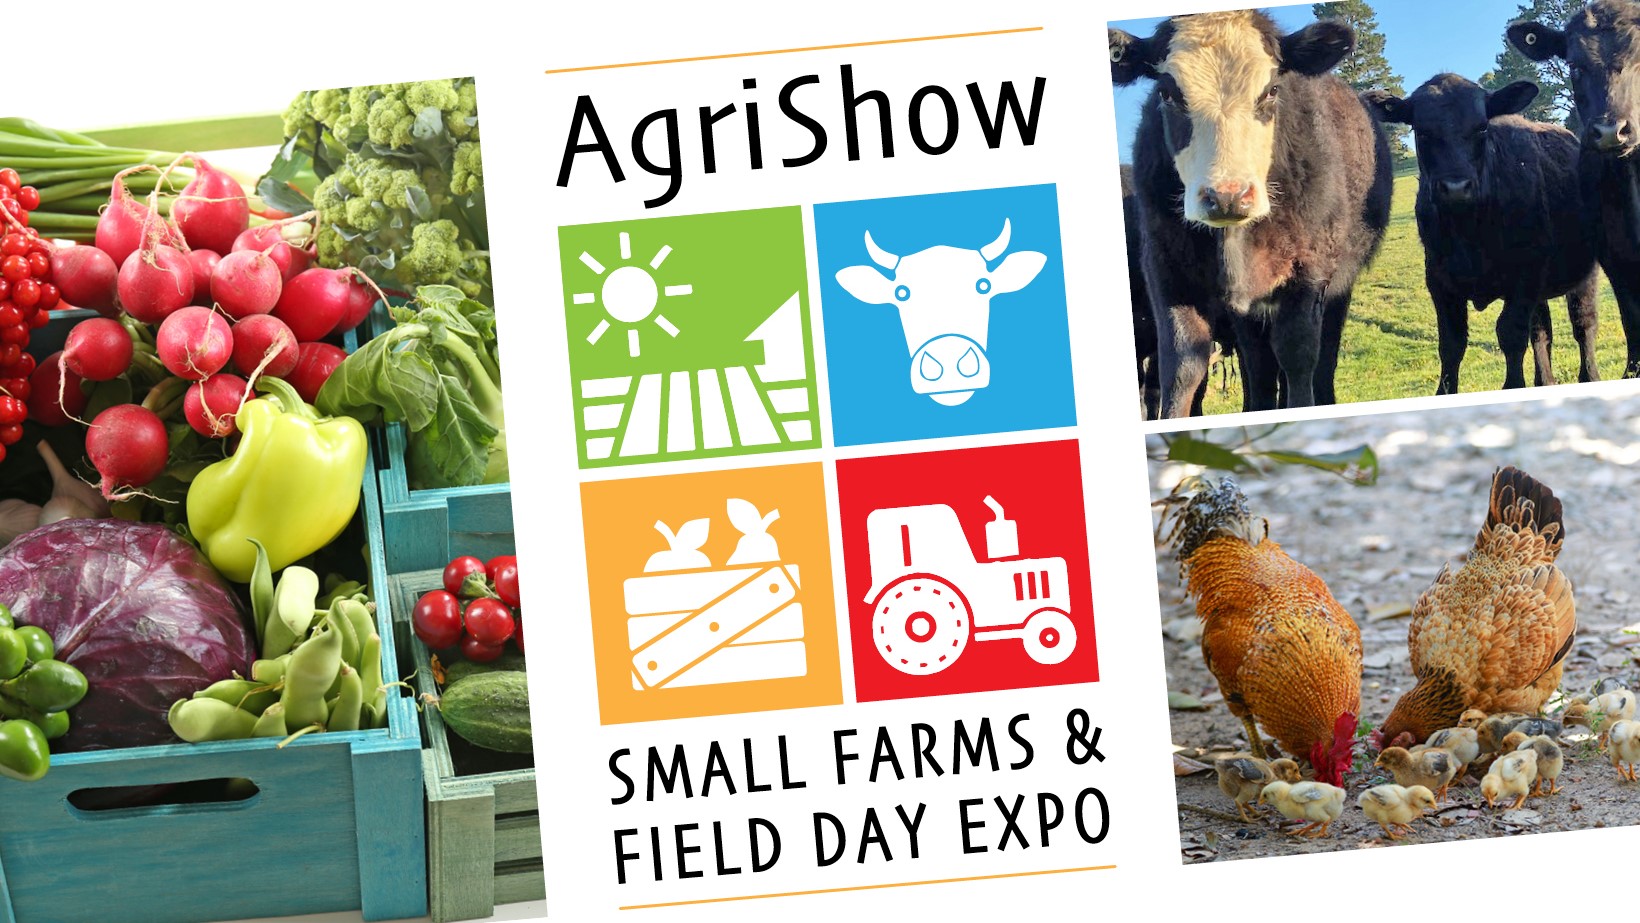 AgriShow – Small Farms & Field Day Expo, Moss Vale, NSW